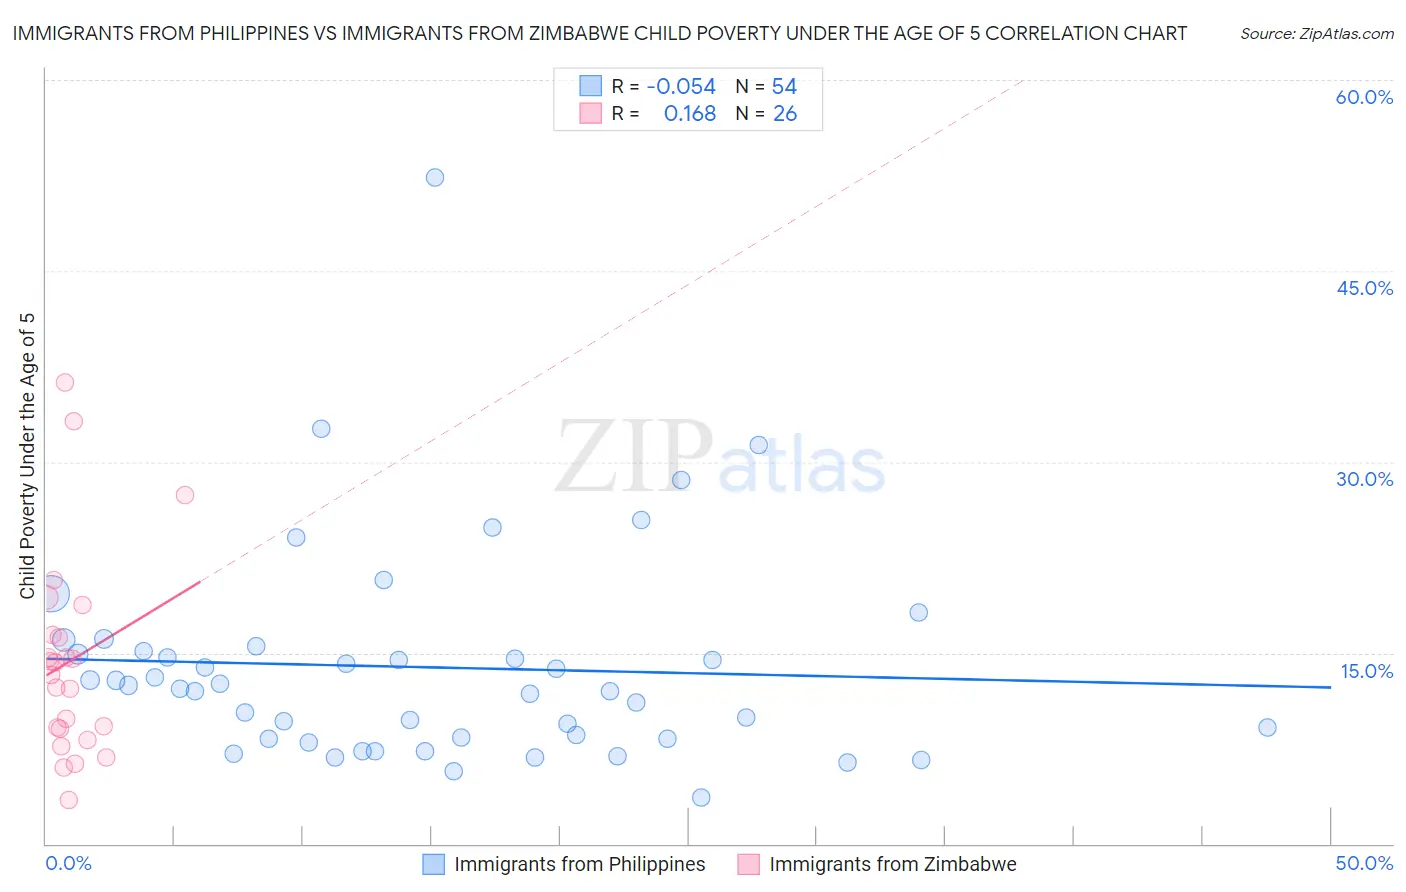 Immigrants from Philippines vs Immigrants from Zimbabwe Child Poverty Under the Age of 5